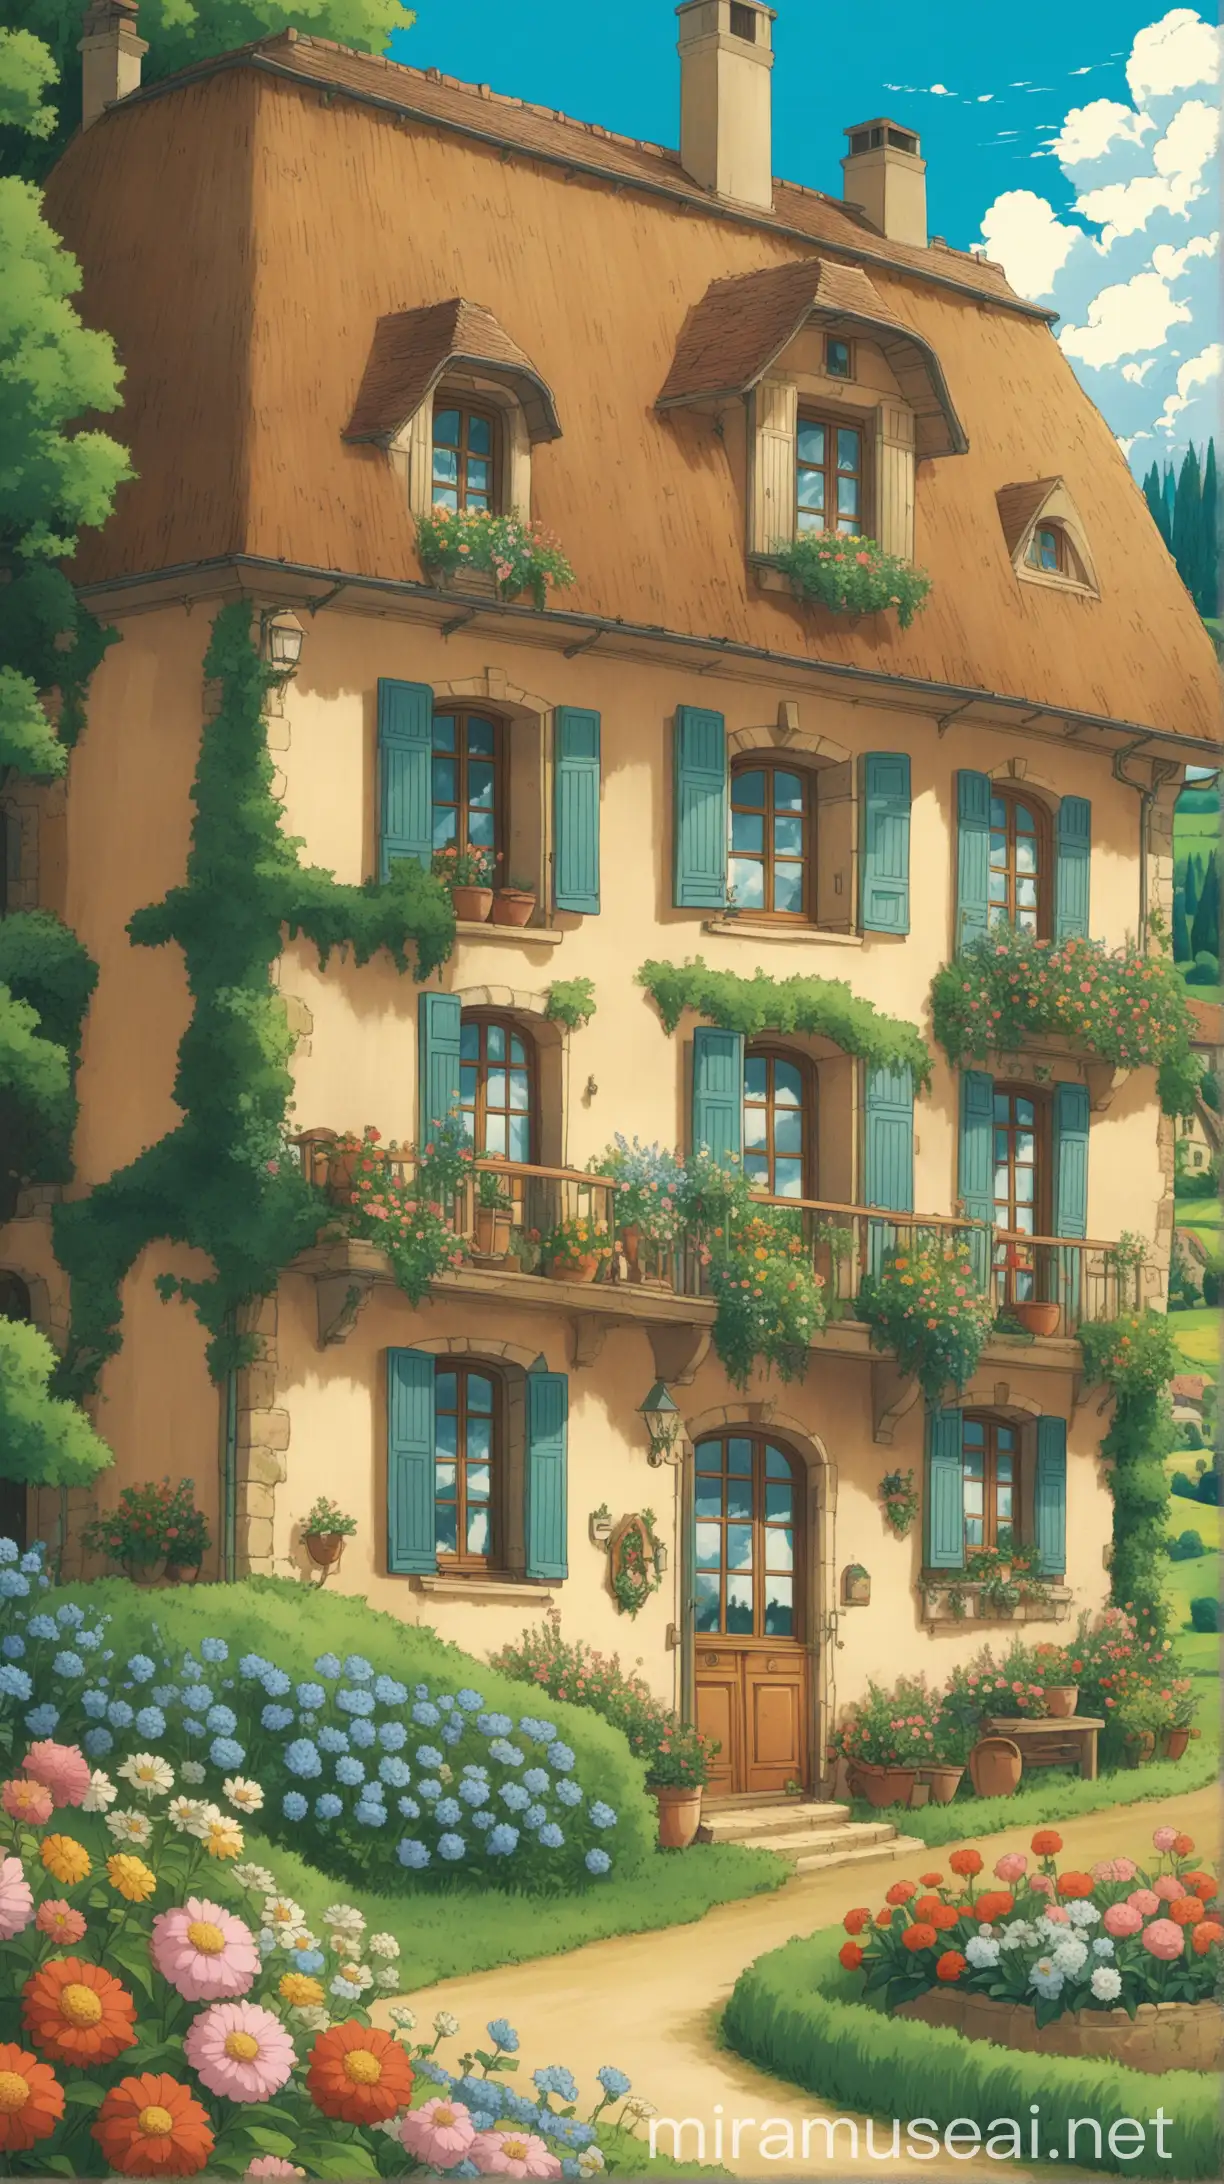  ghibli style  cozy, countryside, french house, with lush flowers